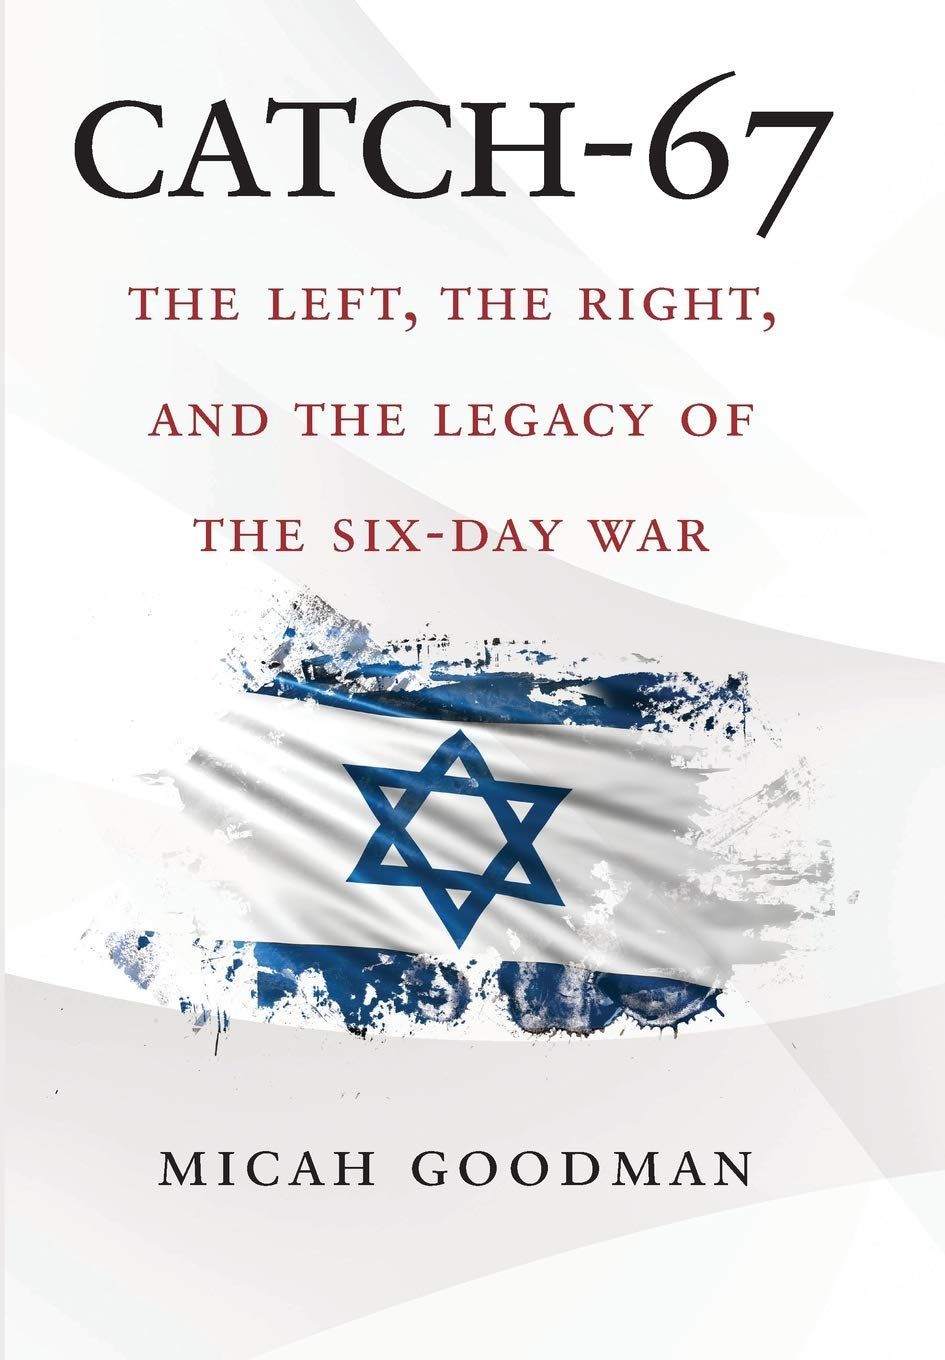 Israel Versus Israel: On “Catch-67: The Left, the Right, and the Legacy of the Six-Day War”